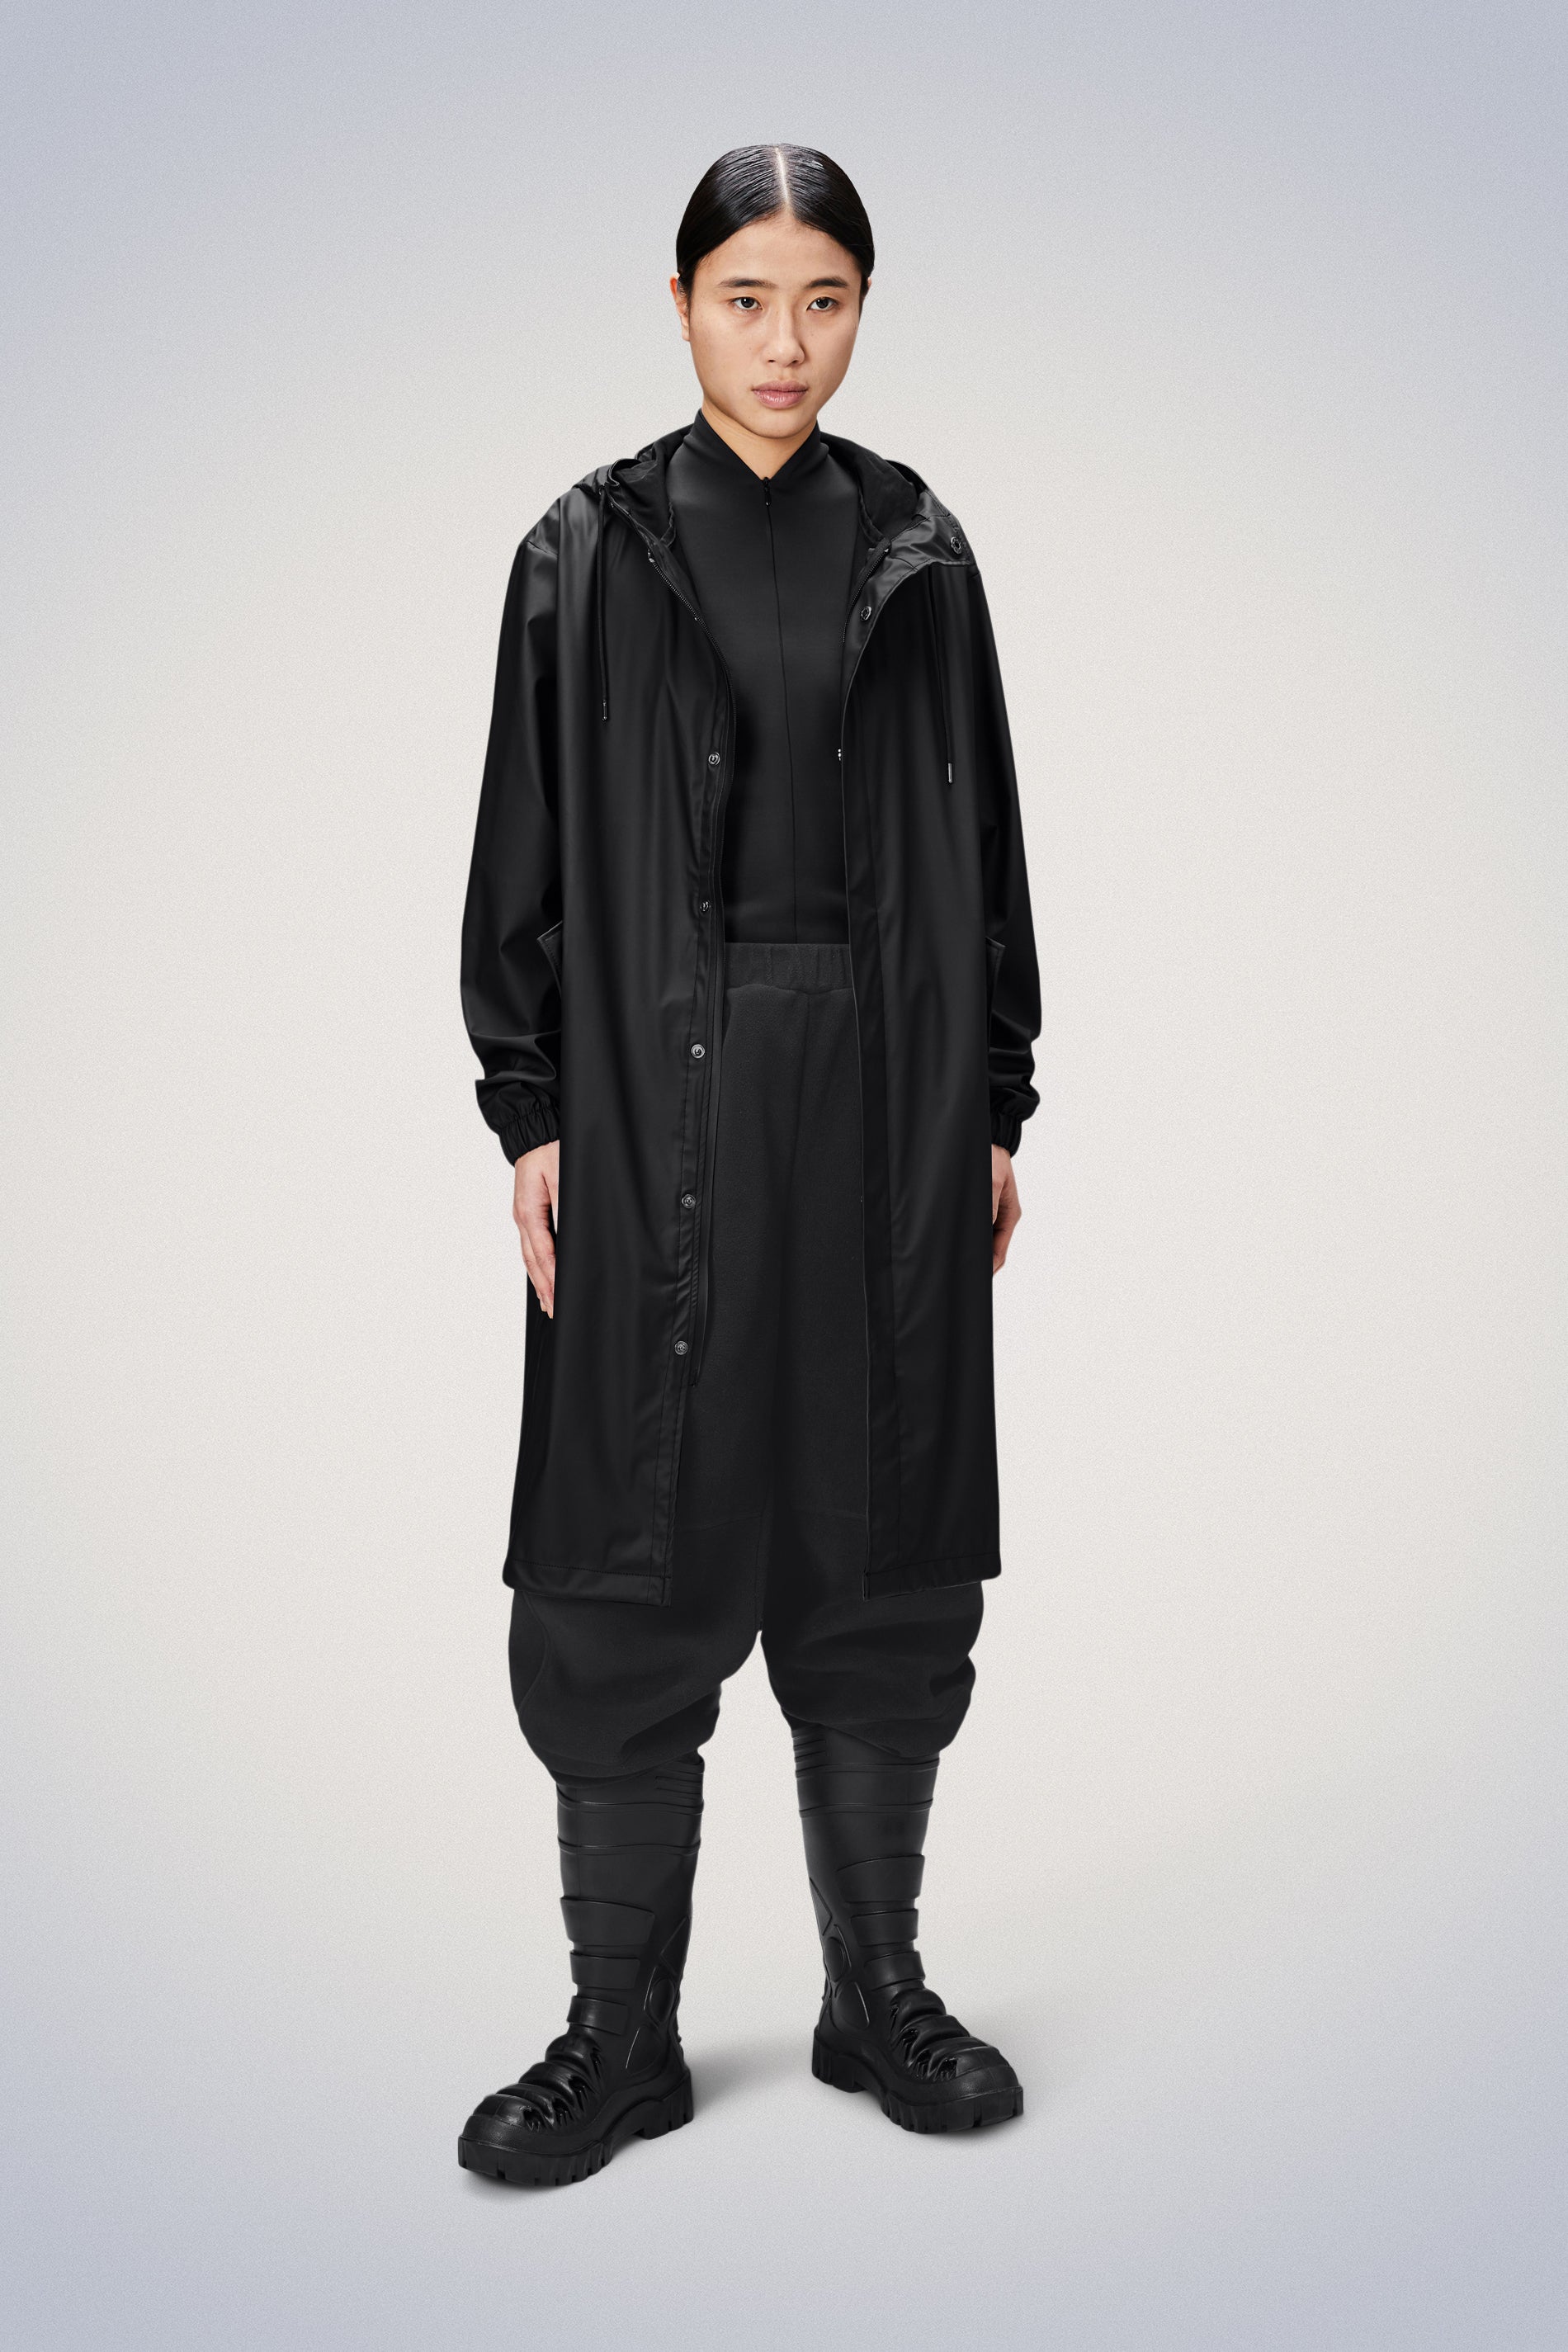 Rains® Fishtail Parka in Black for $155 | Free Shipping